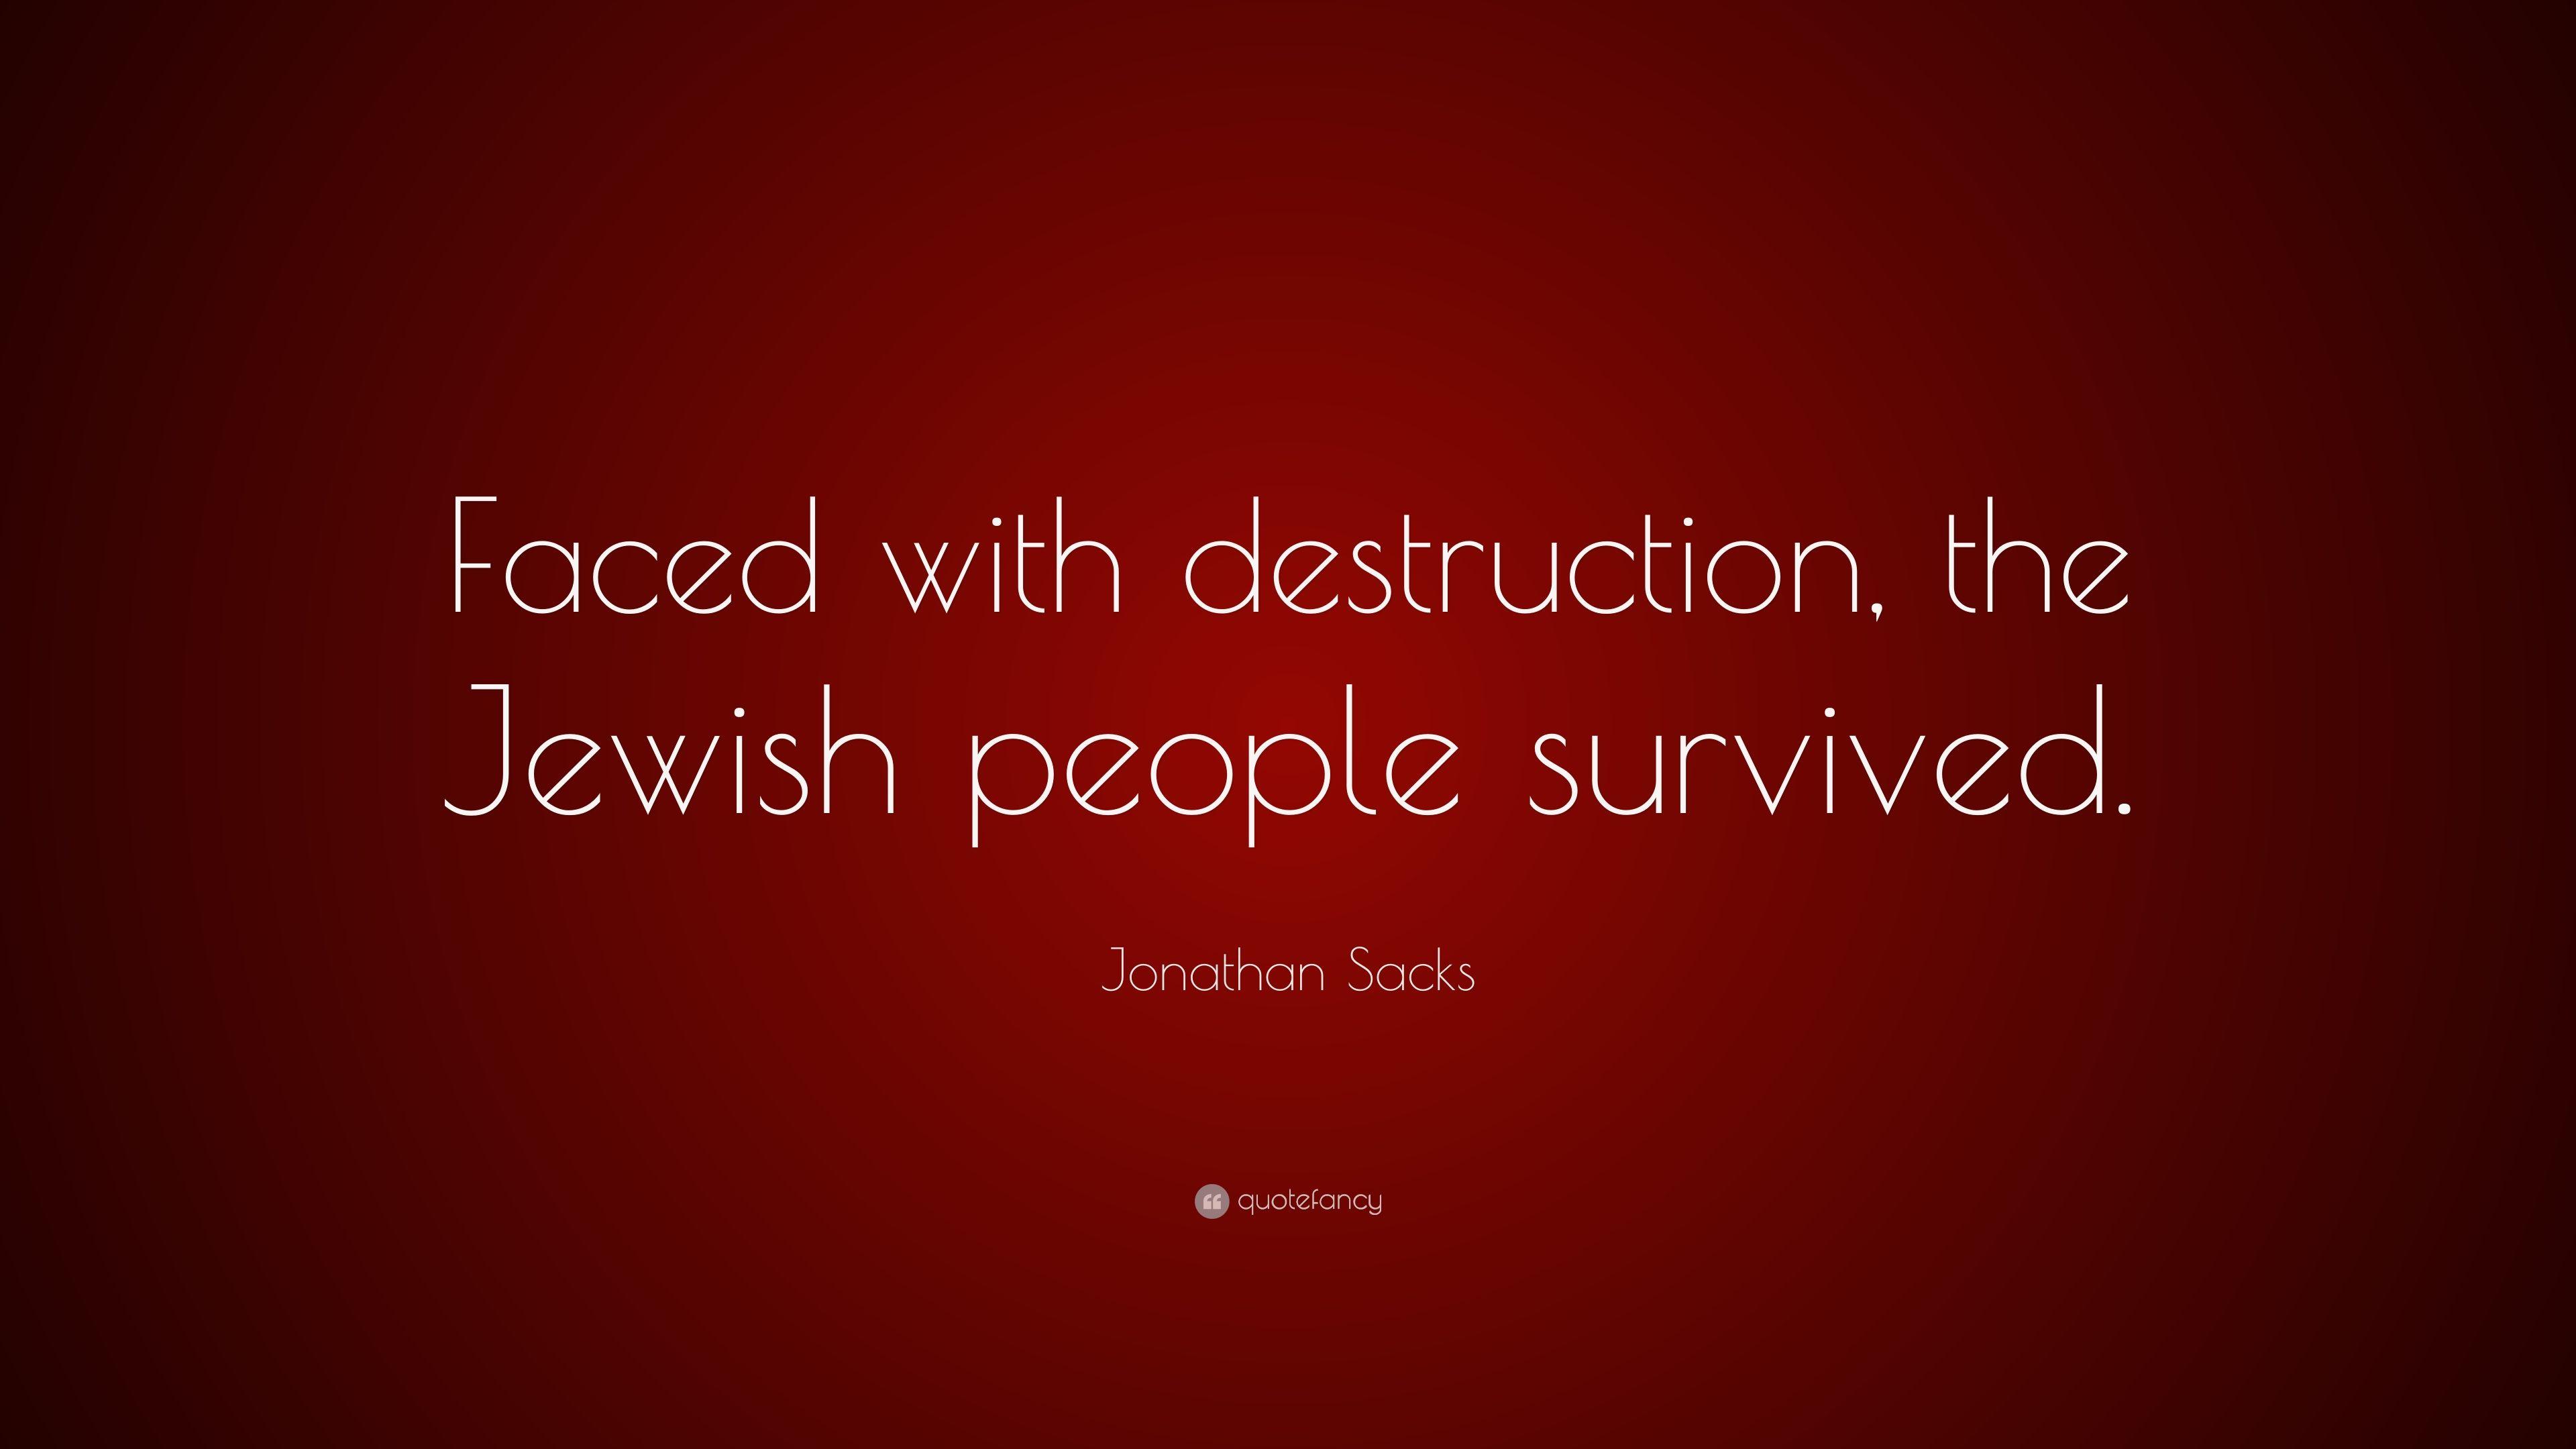 Jonathan Sacks Quote: “Faced with destruction, the Jewish people